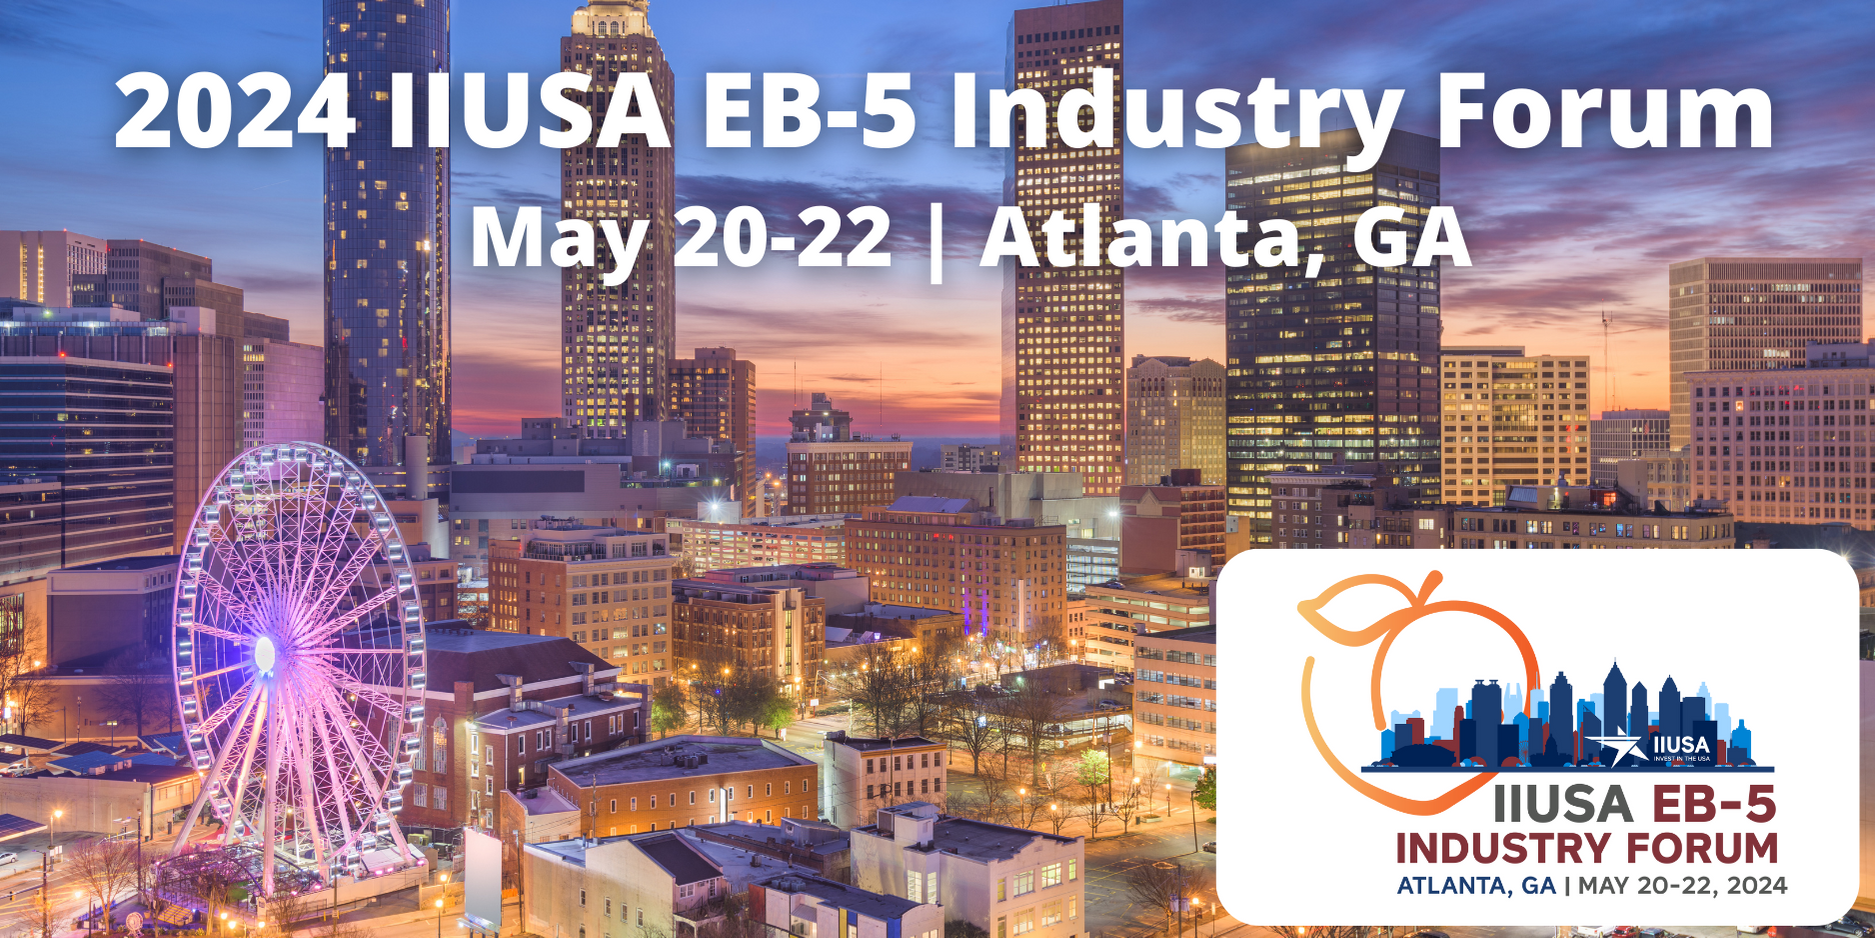 Save the Date: 2024 IIUSA EB-5 Industry Forum is Heading to Atlanta